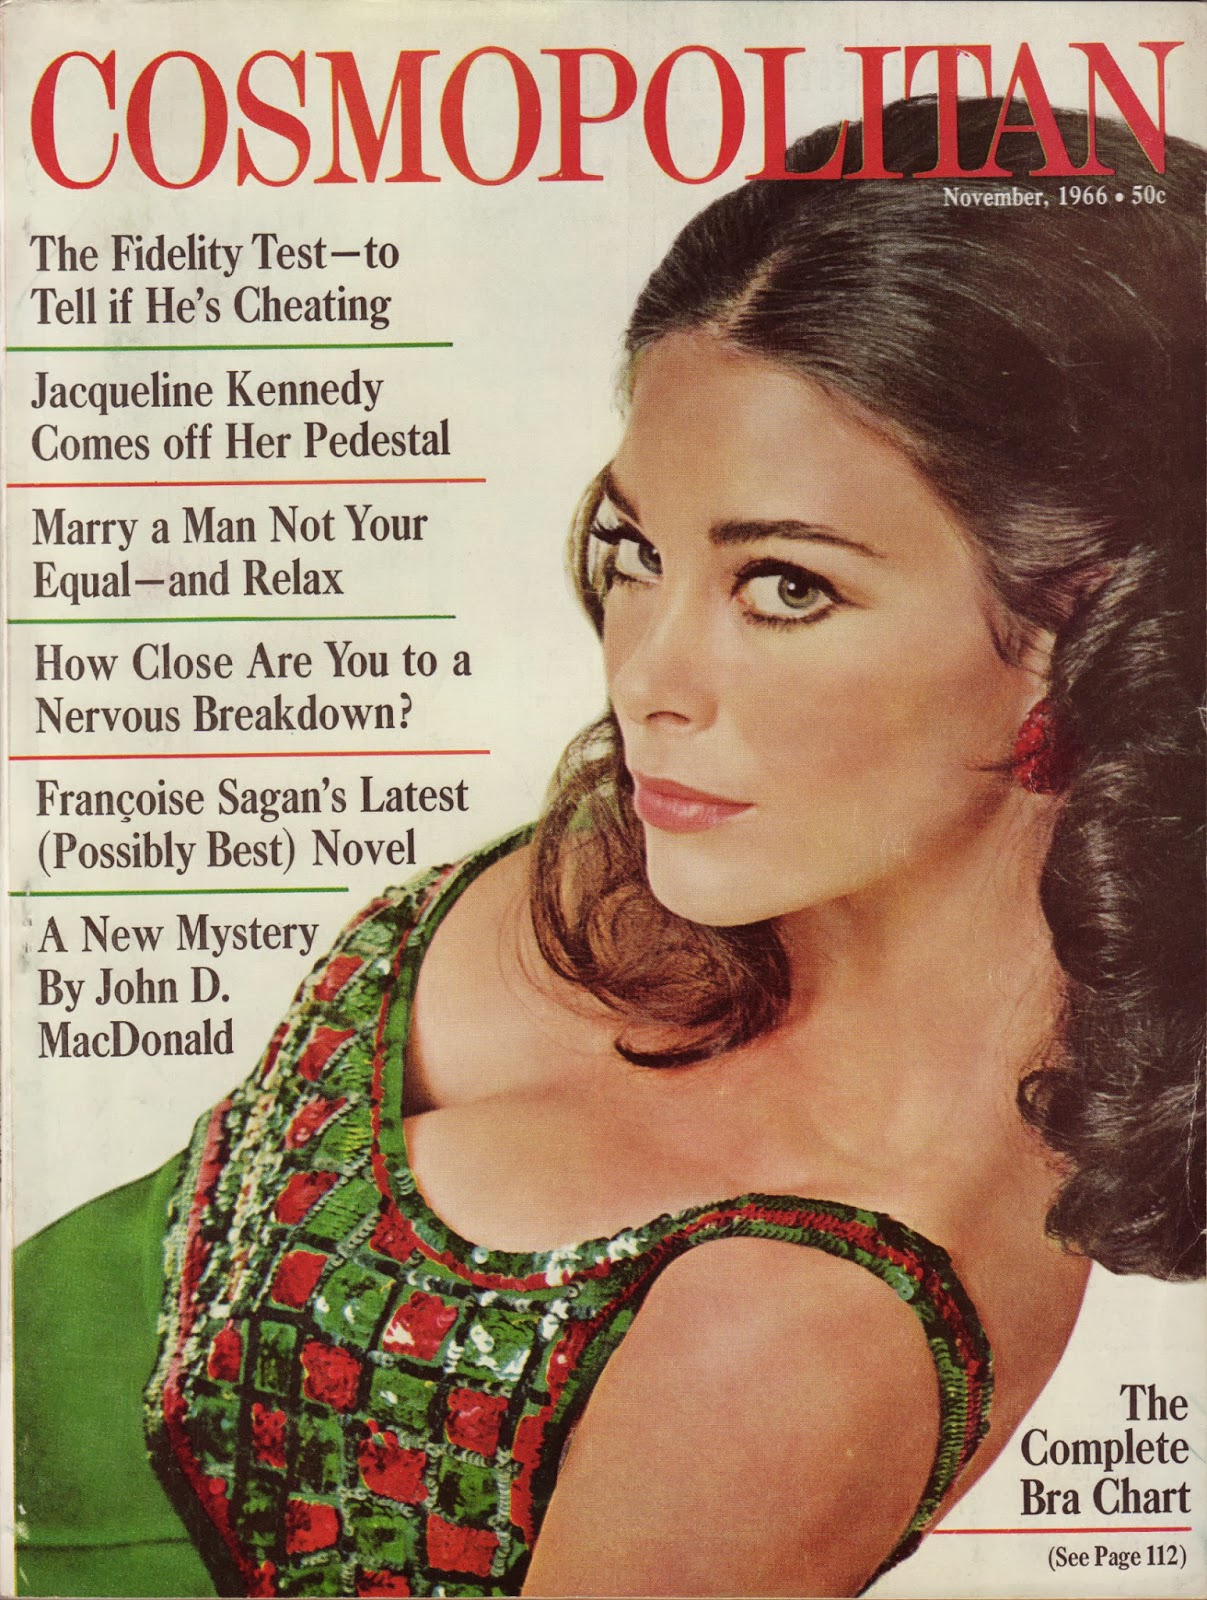 Pin on 1965 - 1969 Vintage Cosmopolitan Covers &amp; Ads